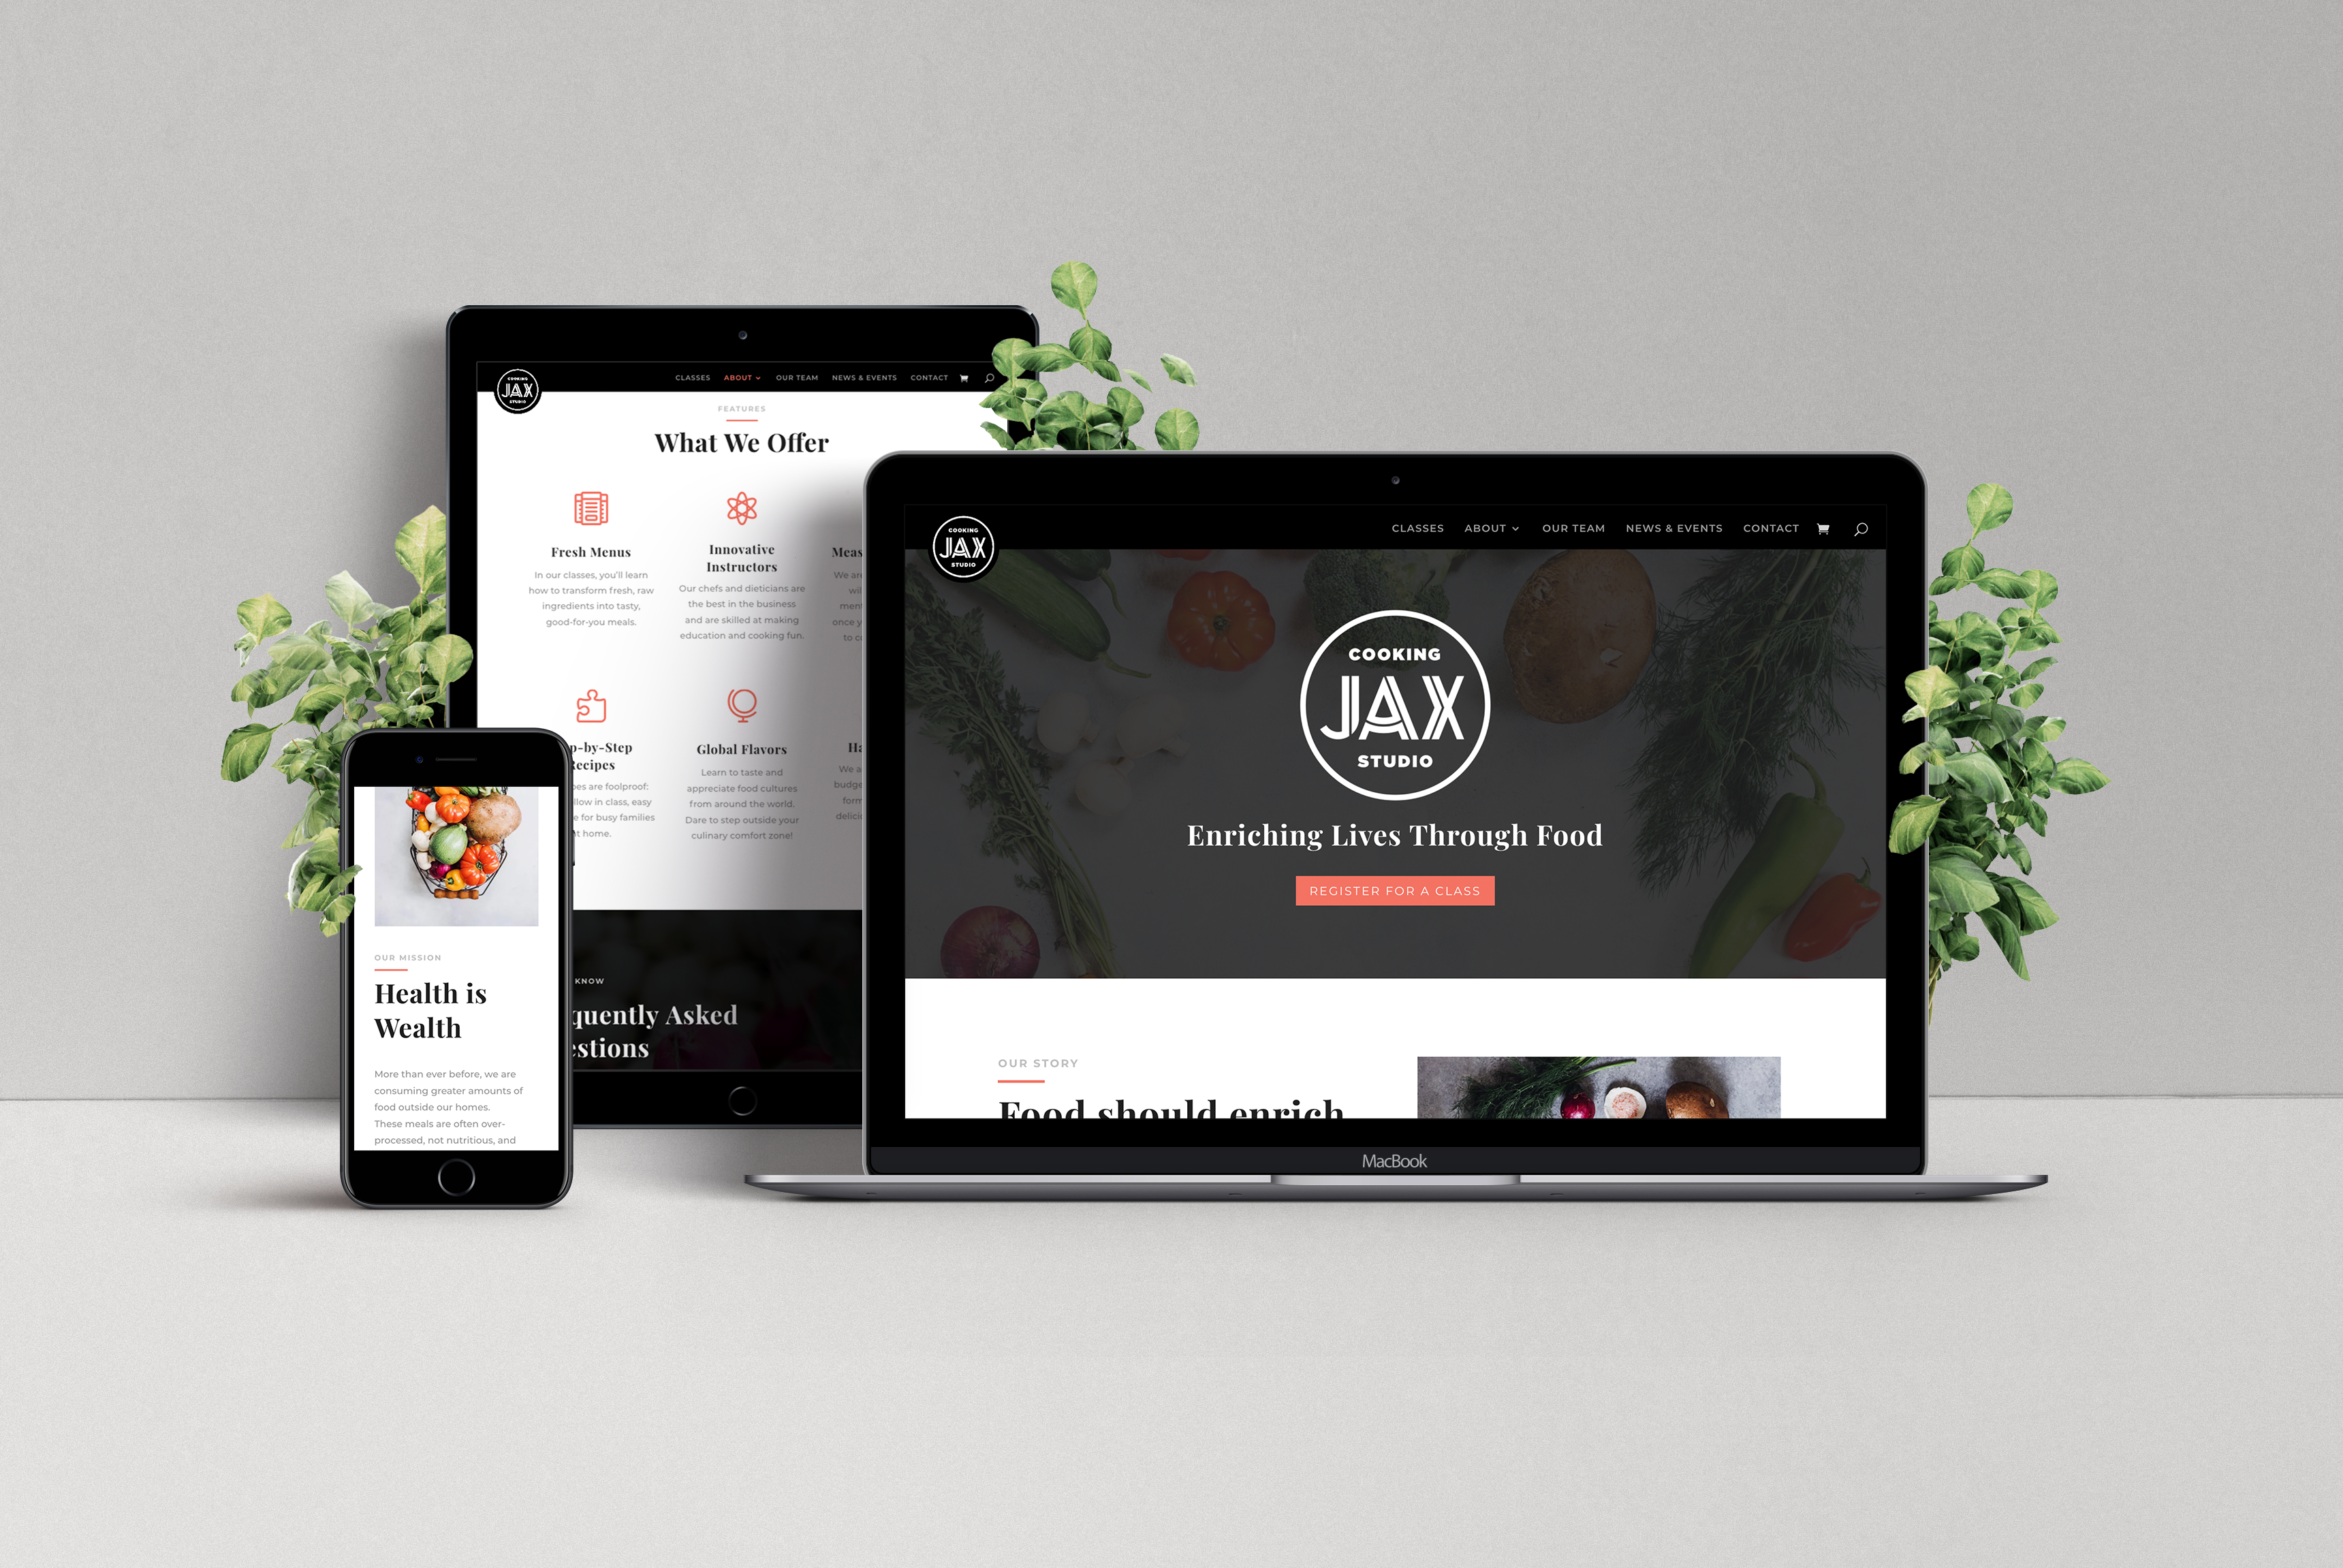 The website of JAX Cooking Studio displayed on an iPhone, iPad, and MacBook. The laptop features the logo and tagline (Enriching Lives Through Food) upon a dark gray background with vegetables.